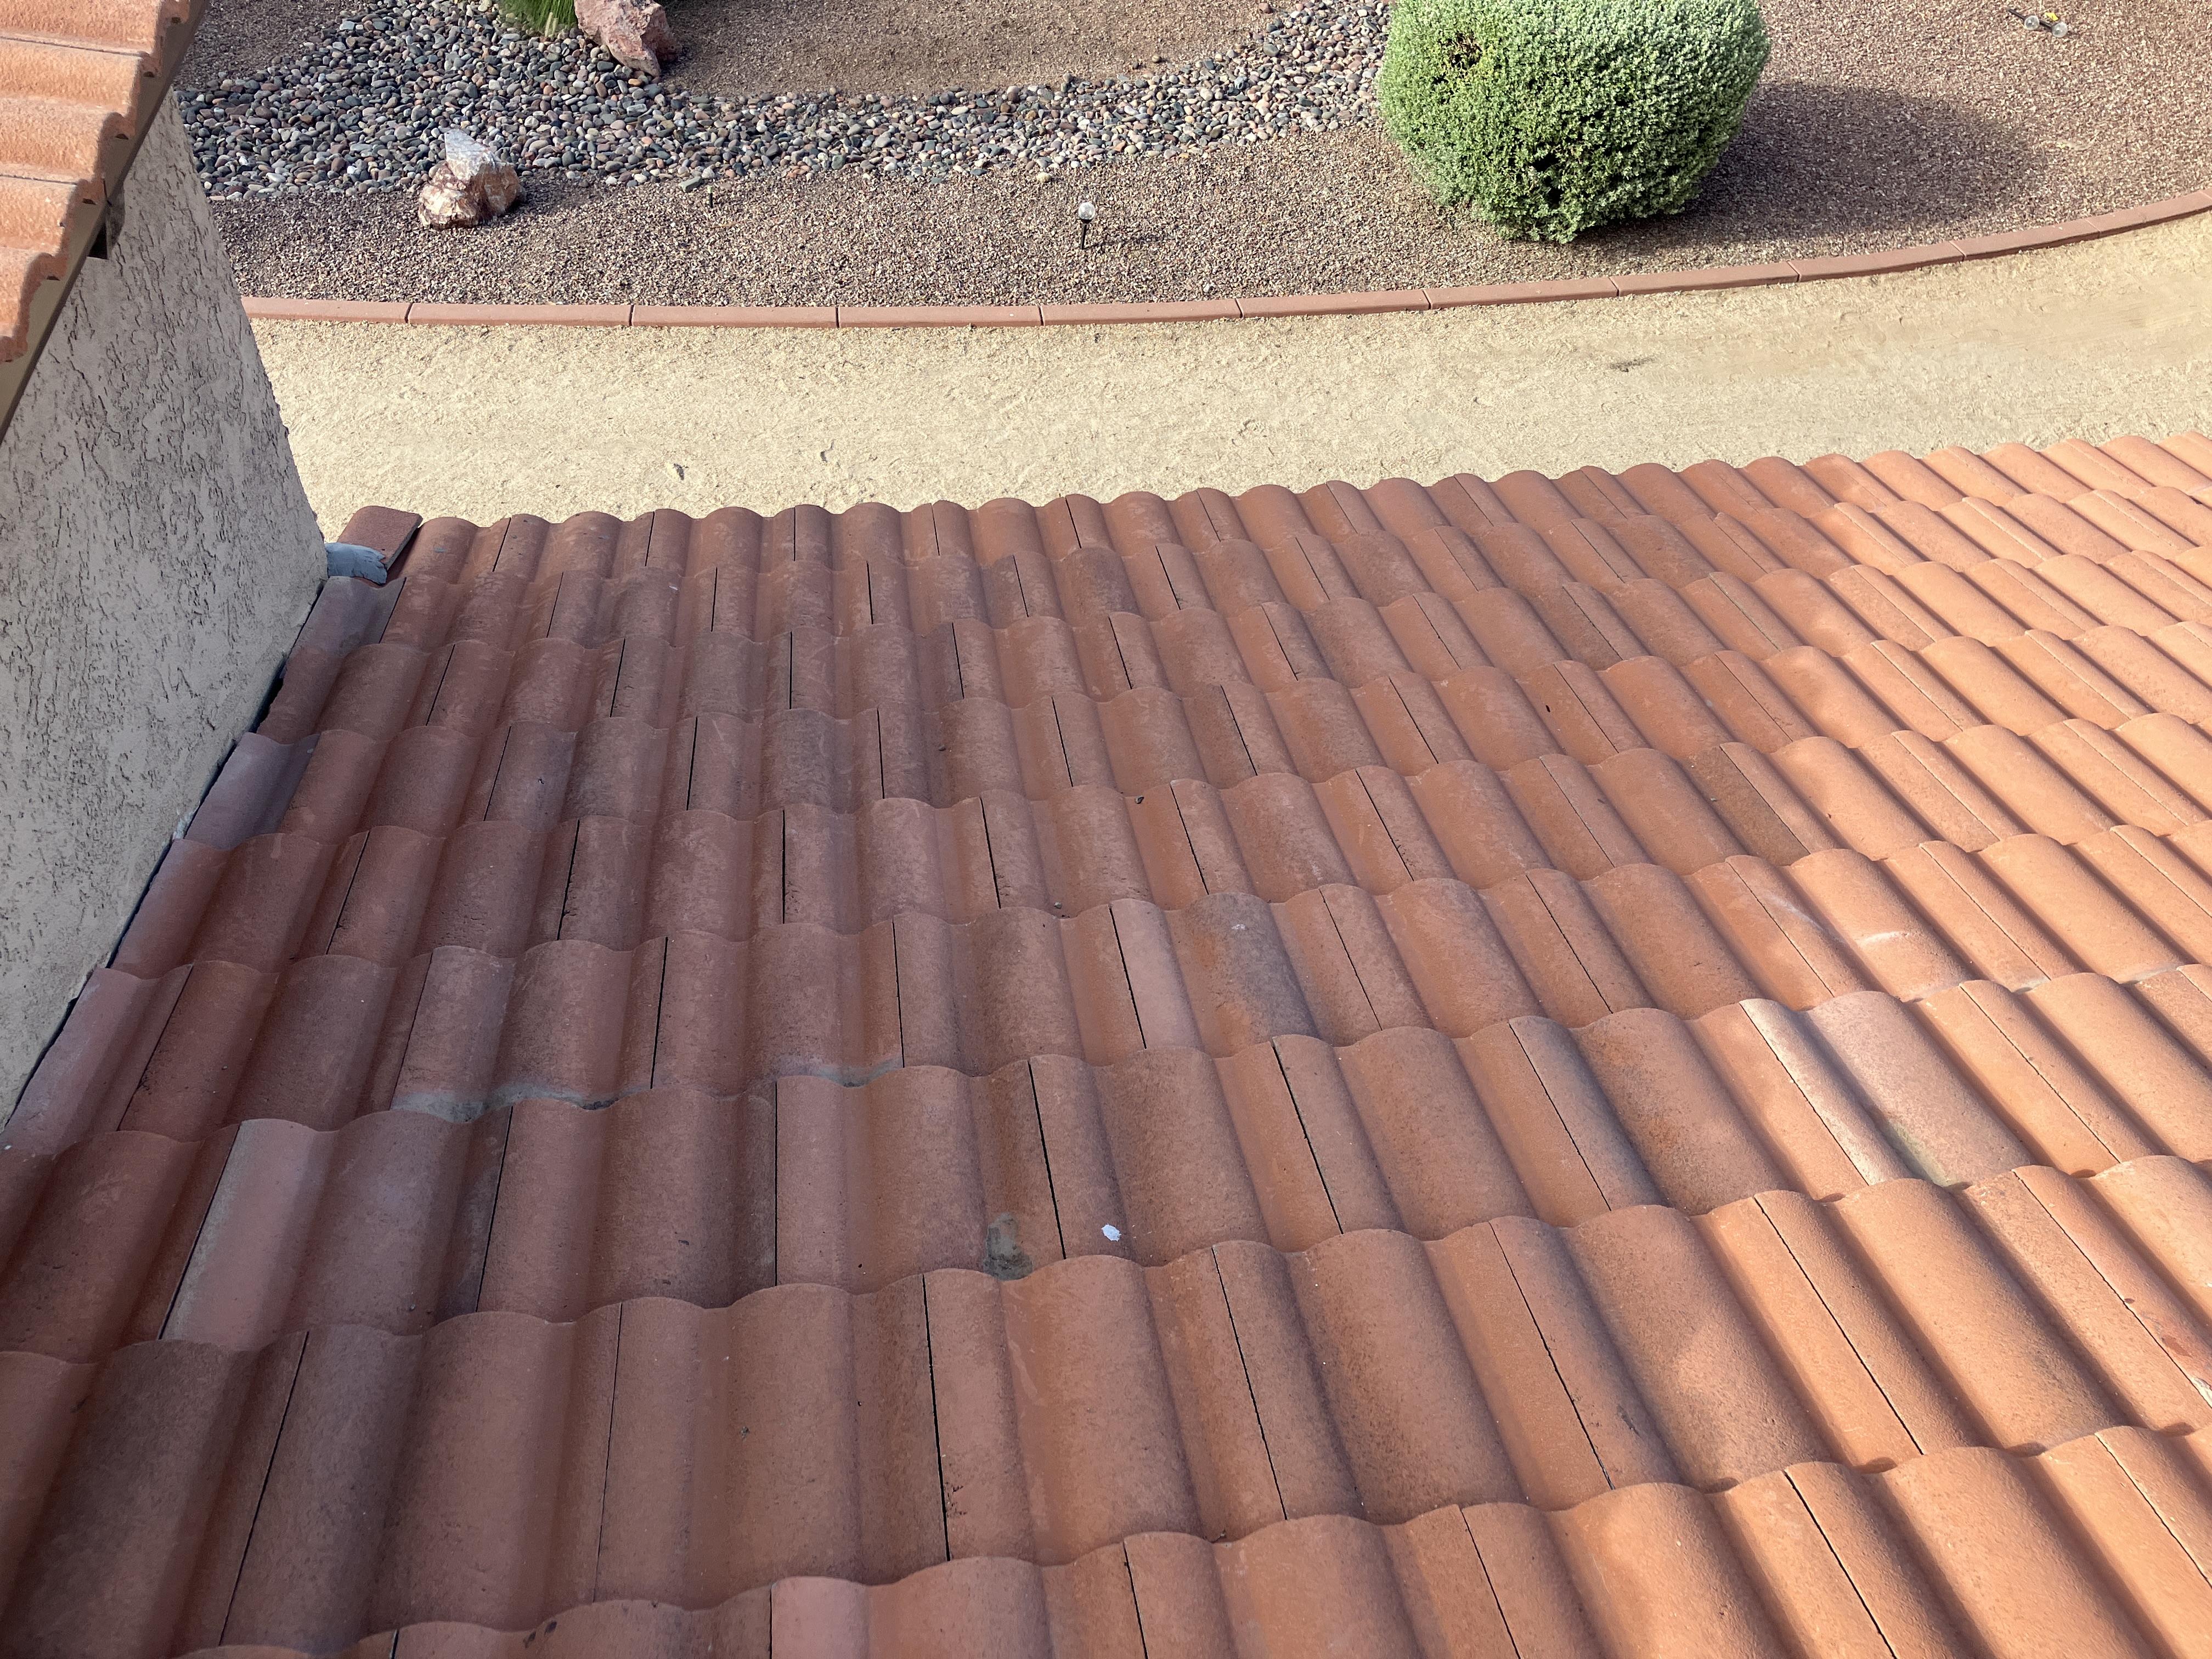 Understanding a Tile Roof in Arid Climates